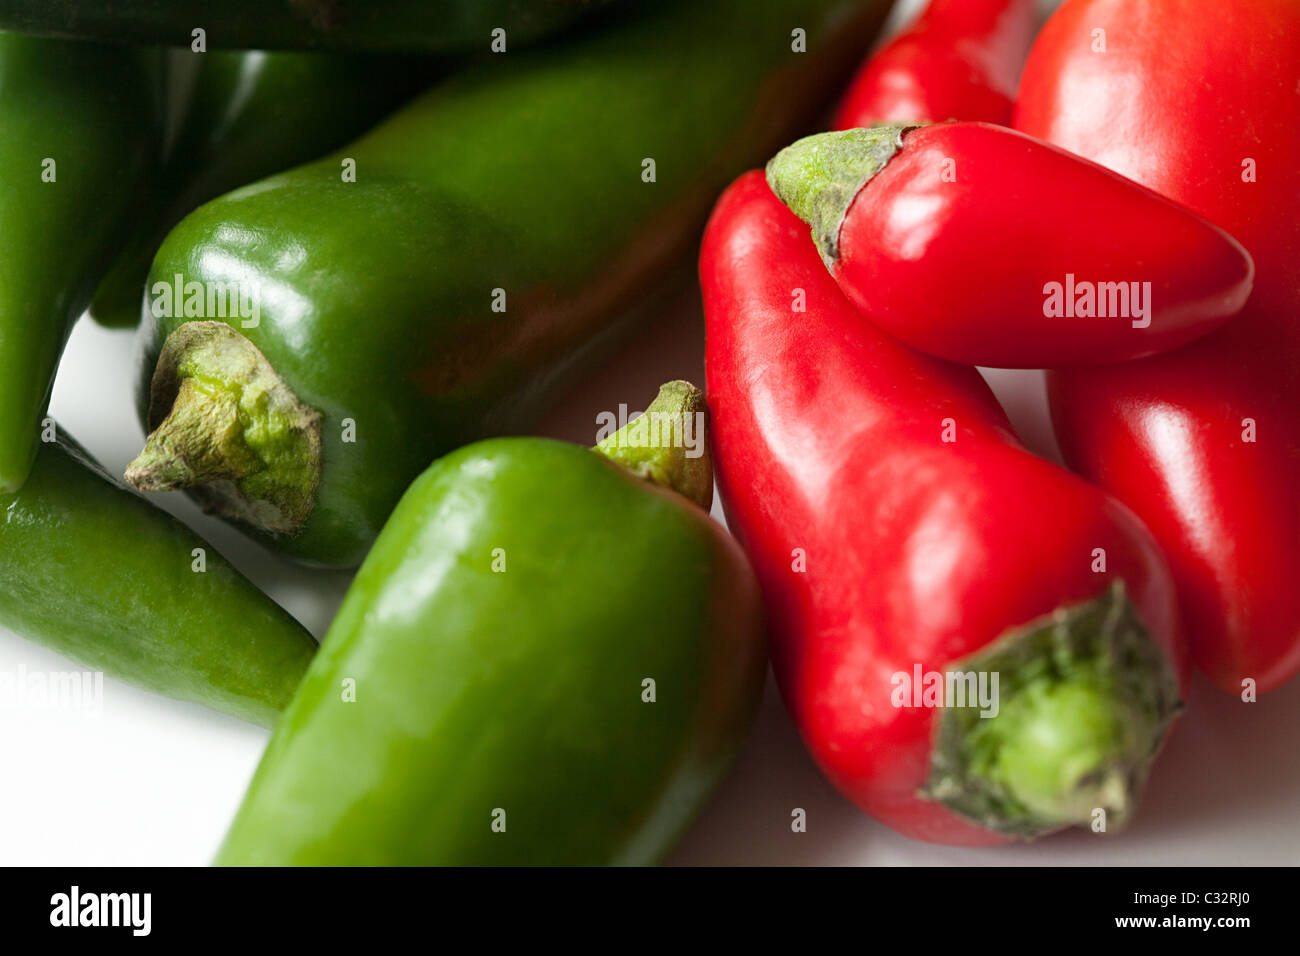 Green and red chilli peppers Stock Photo